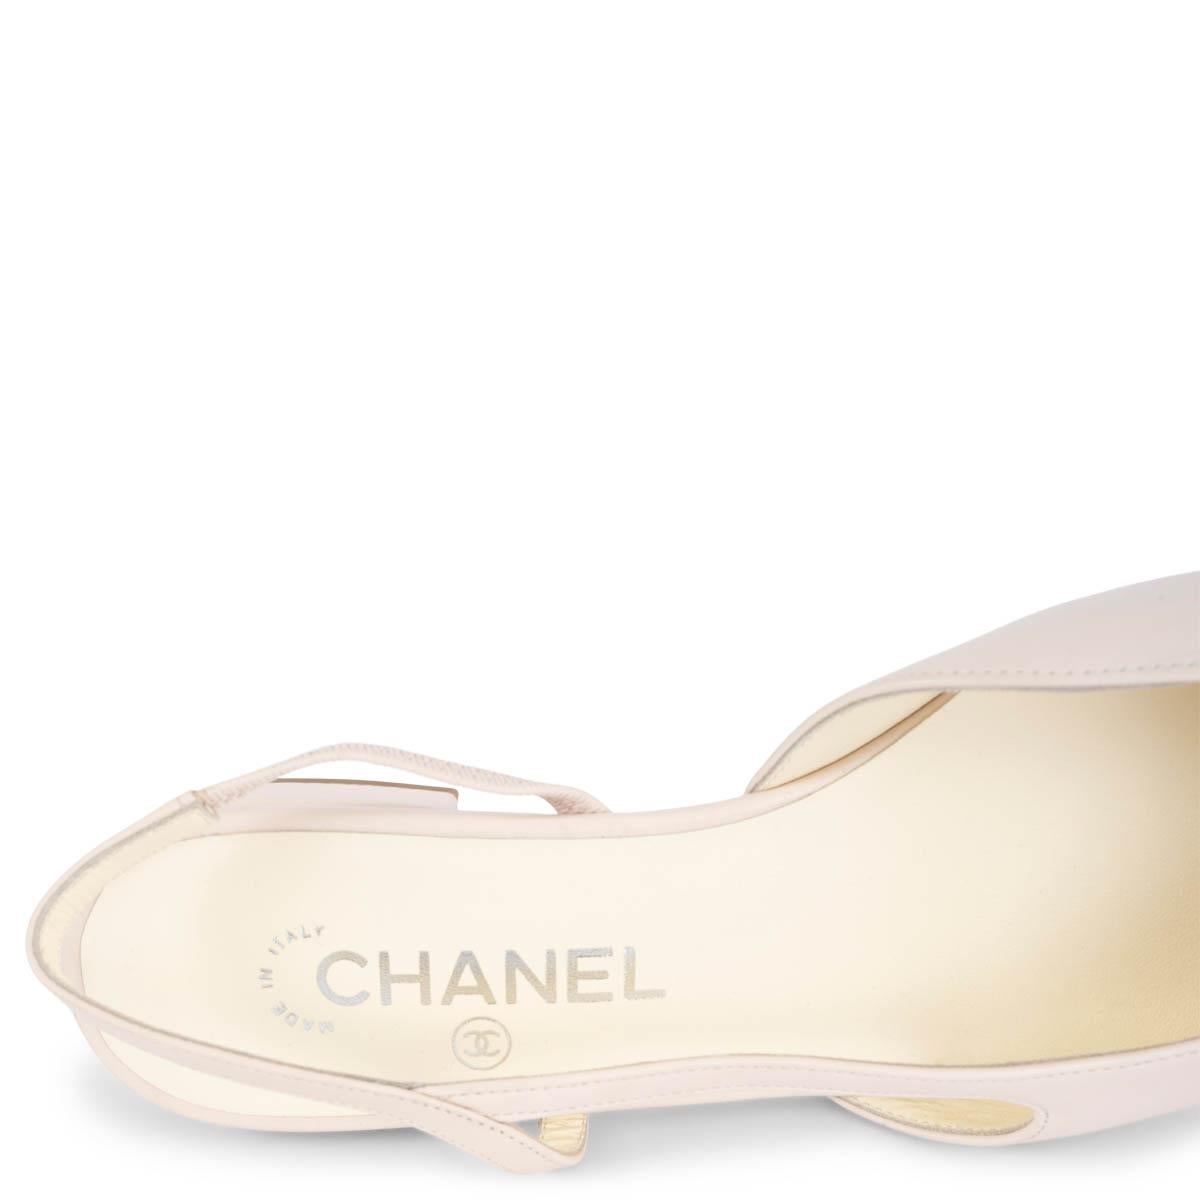 CHANEL ivory & coral leather 2020 20C Slingbacks Flats Shoes 38.5 1